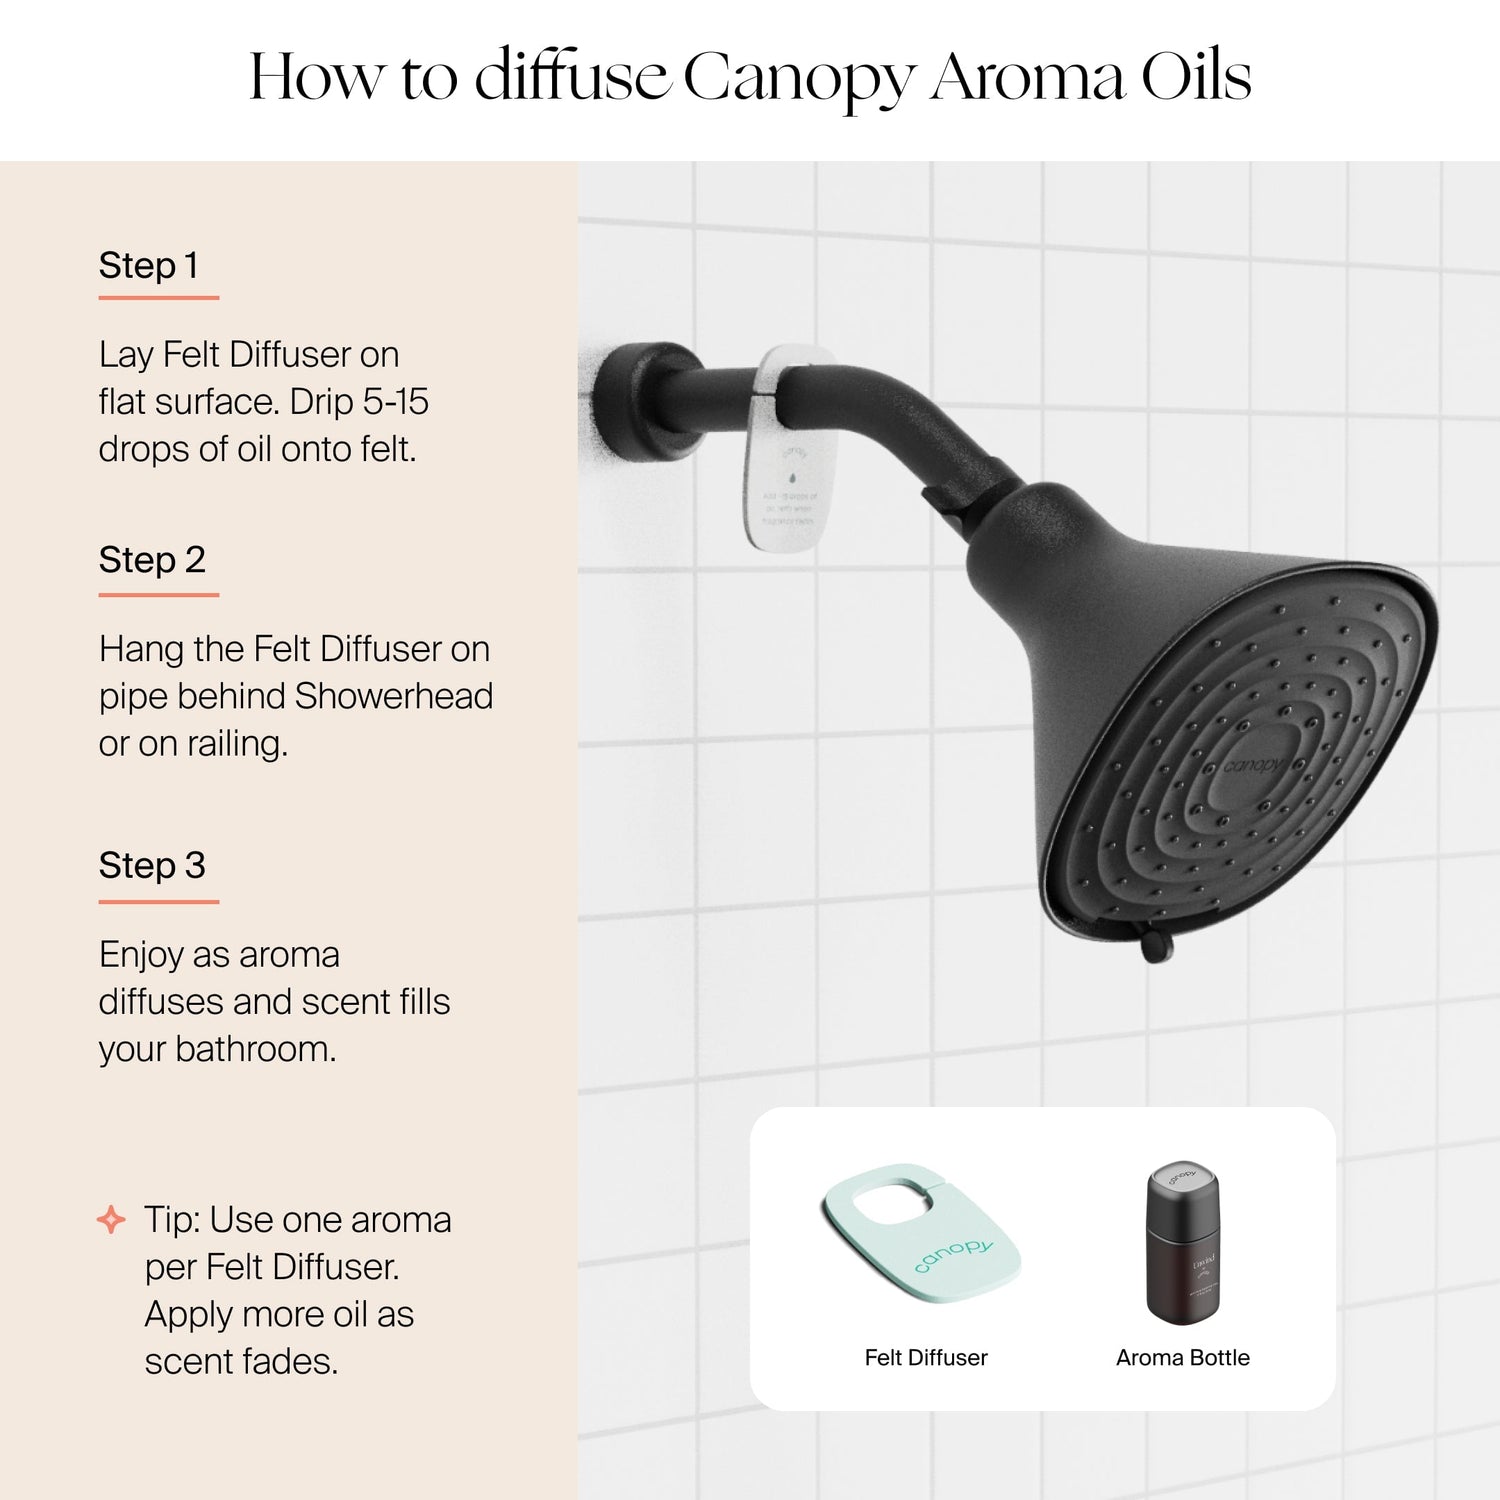 Filtered Showerhead | Lifestyle, Diffusing Canopy Aromas